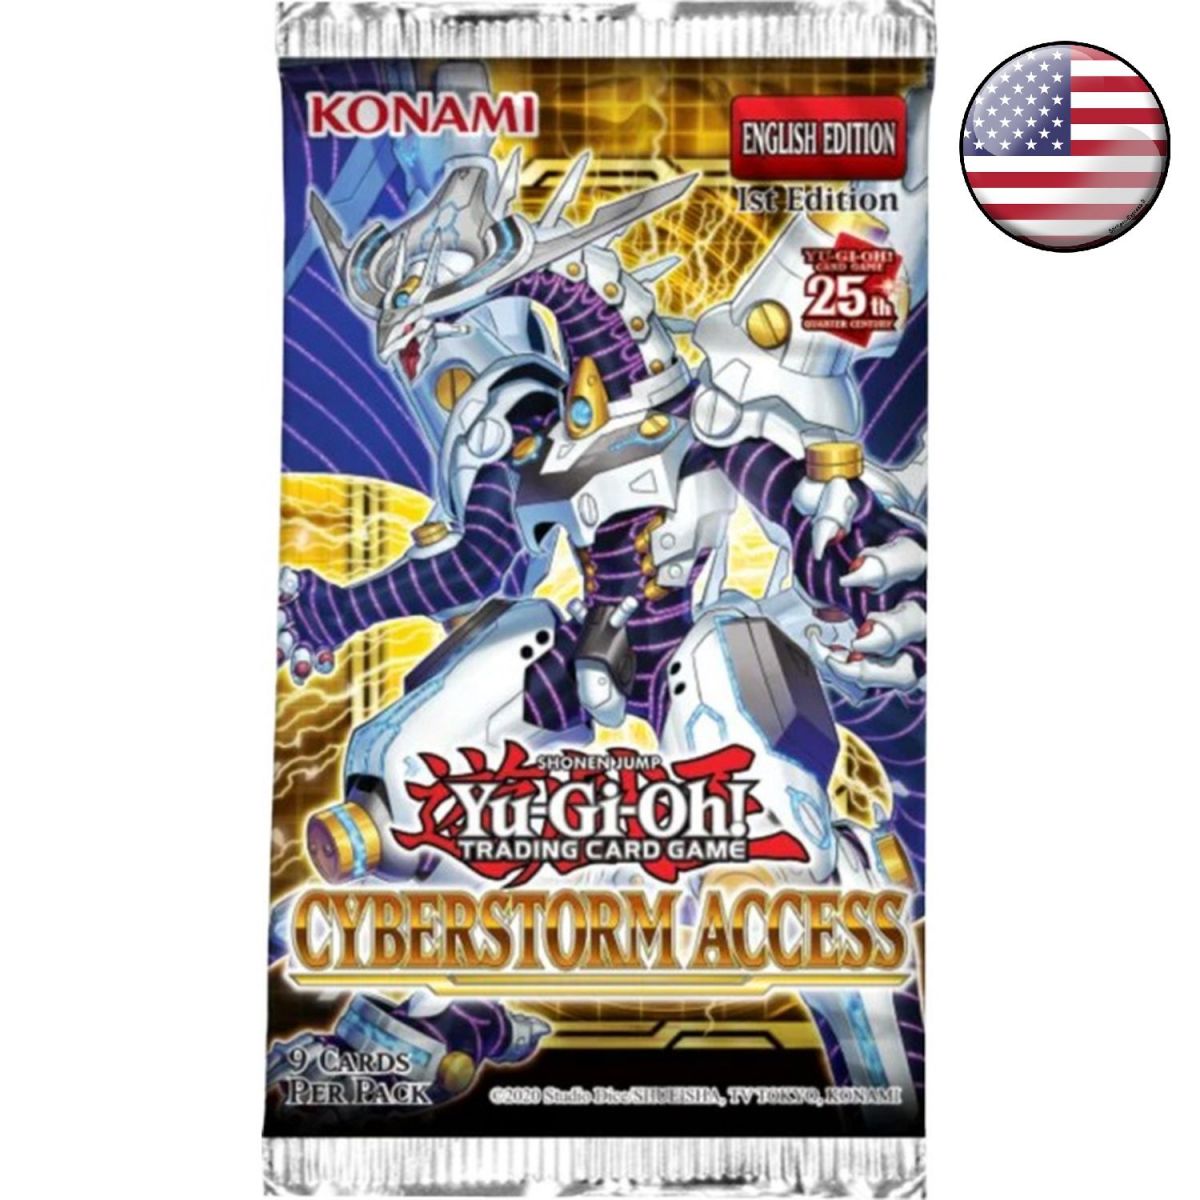 Item *US Print SEALED* Yu-Gi-Oh! - Booster - Cyberstorm Access - AMERICAN